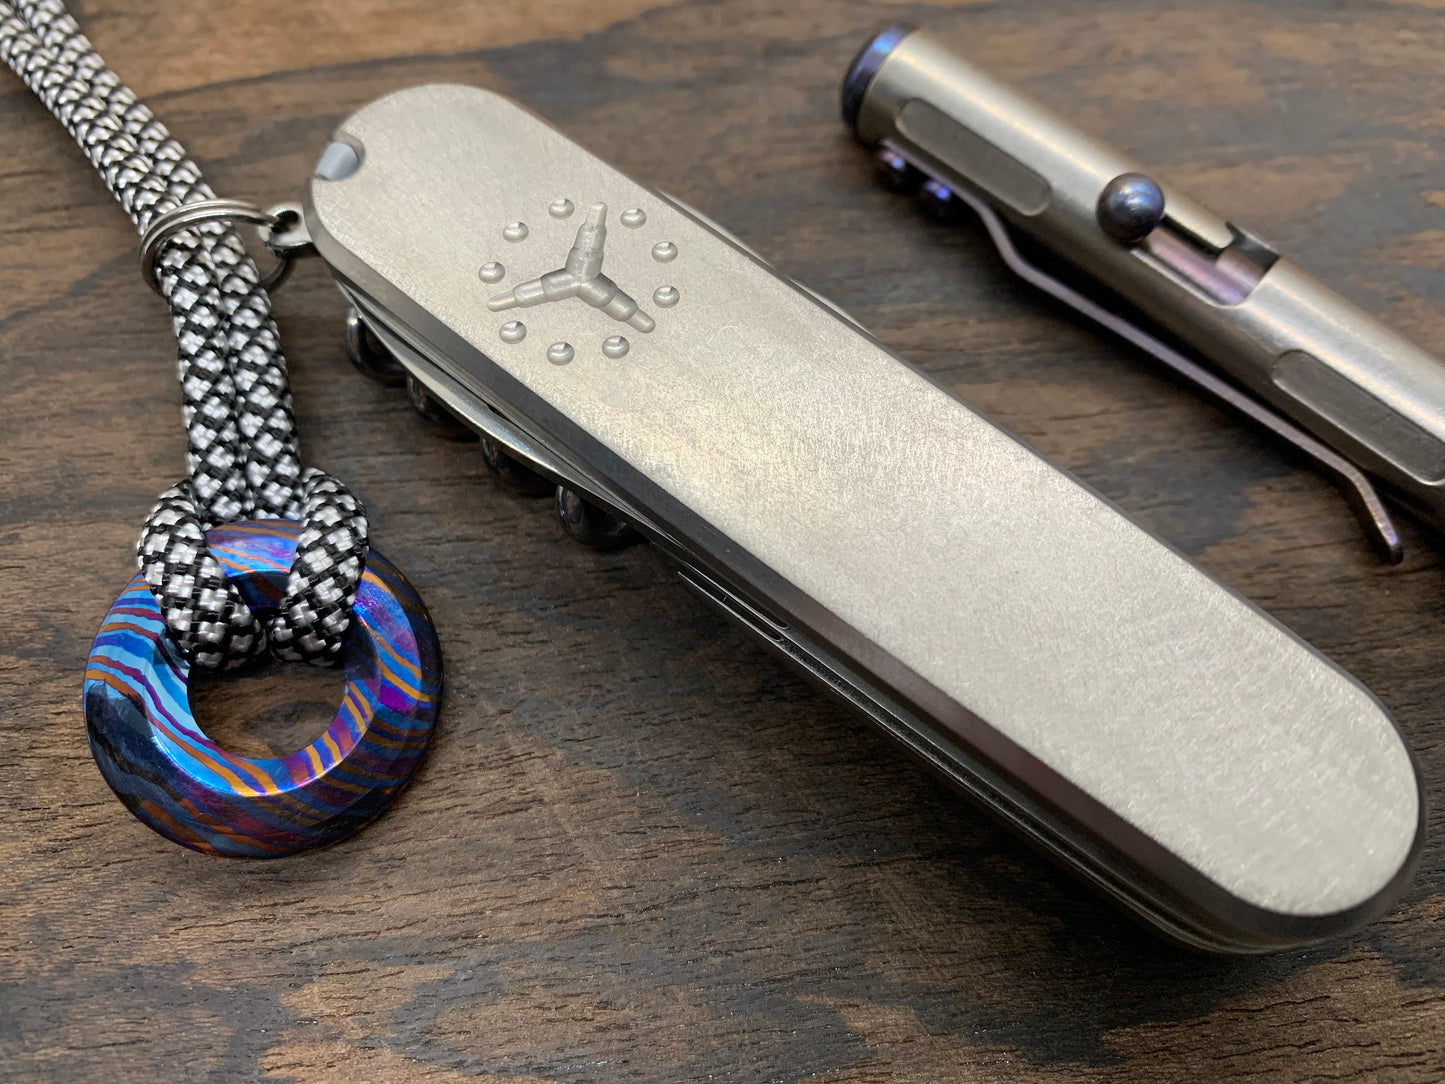 91mm Titanium Scales for Swiss Army SAK Deep Brushed for better grip 91mm